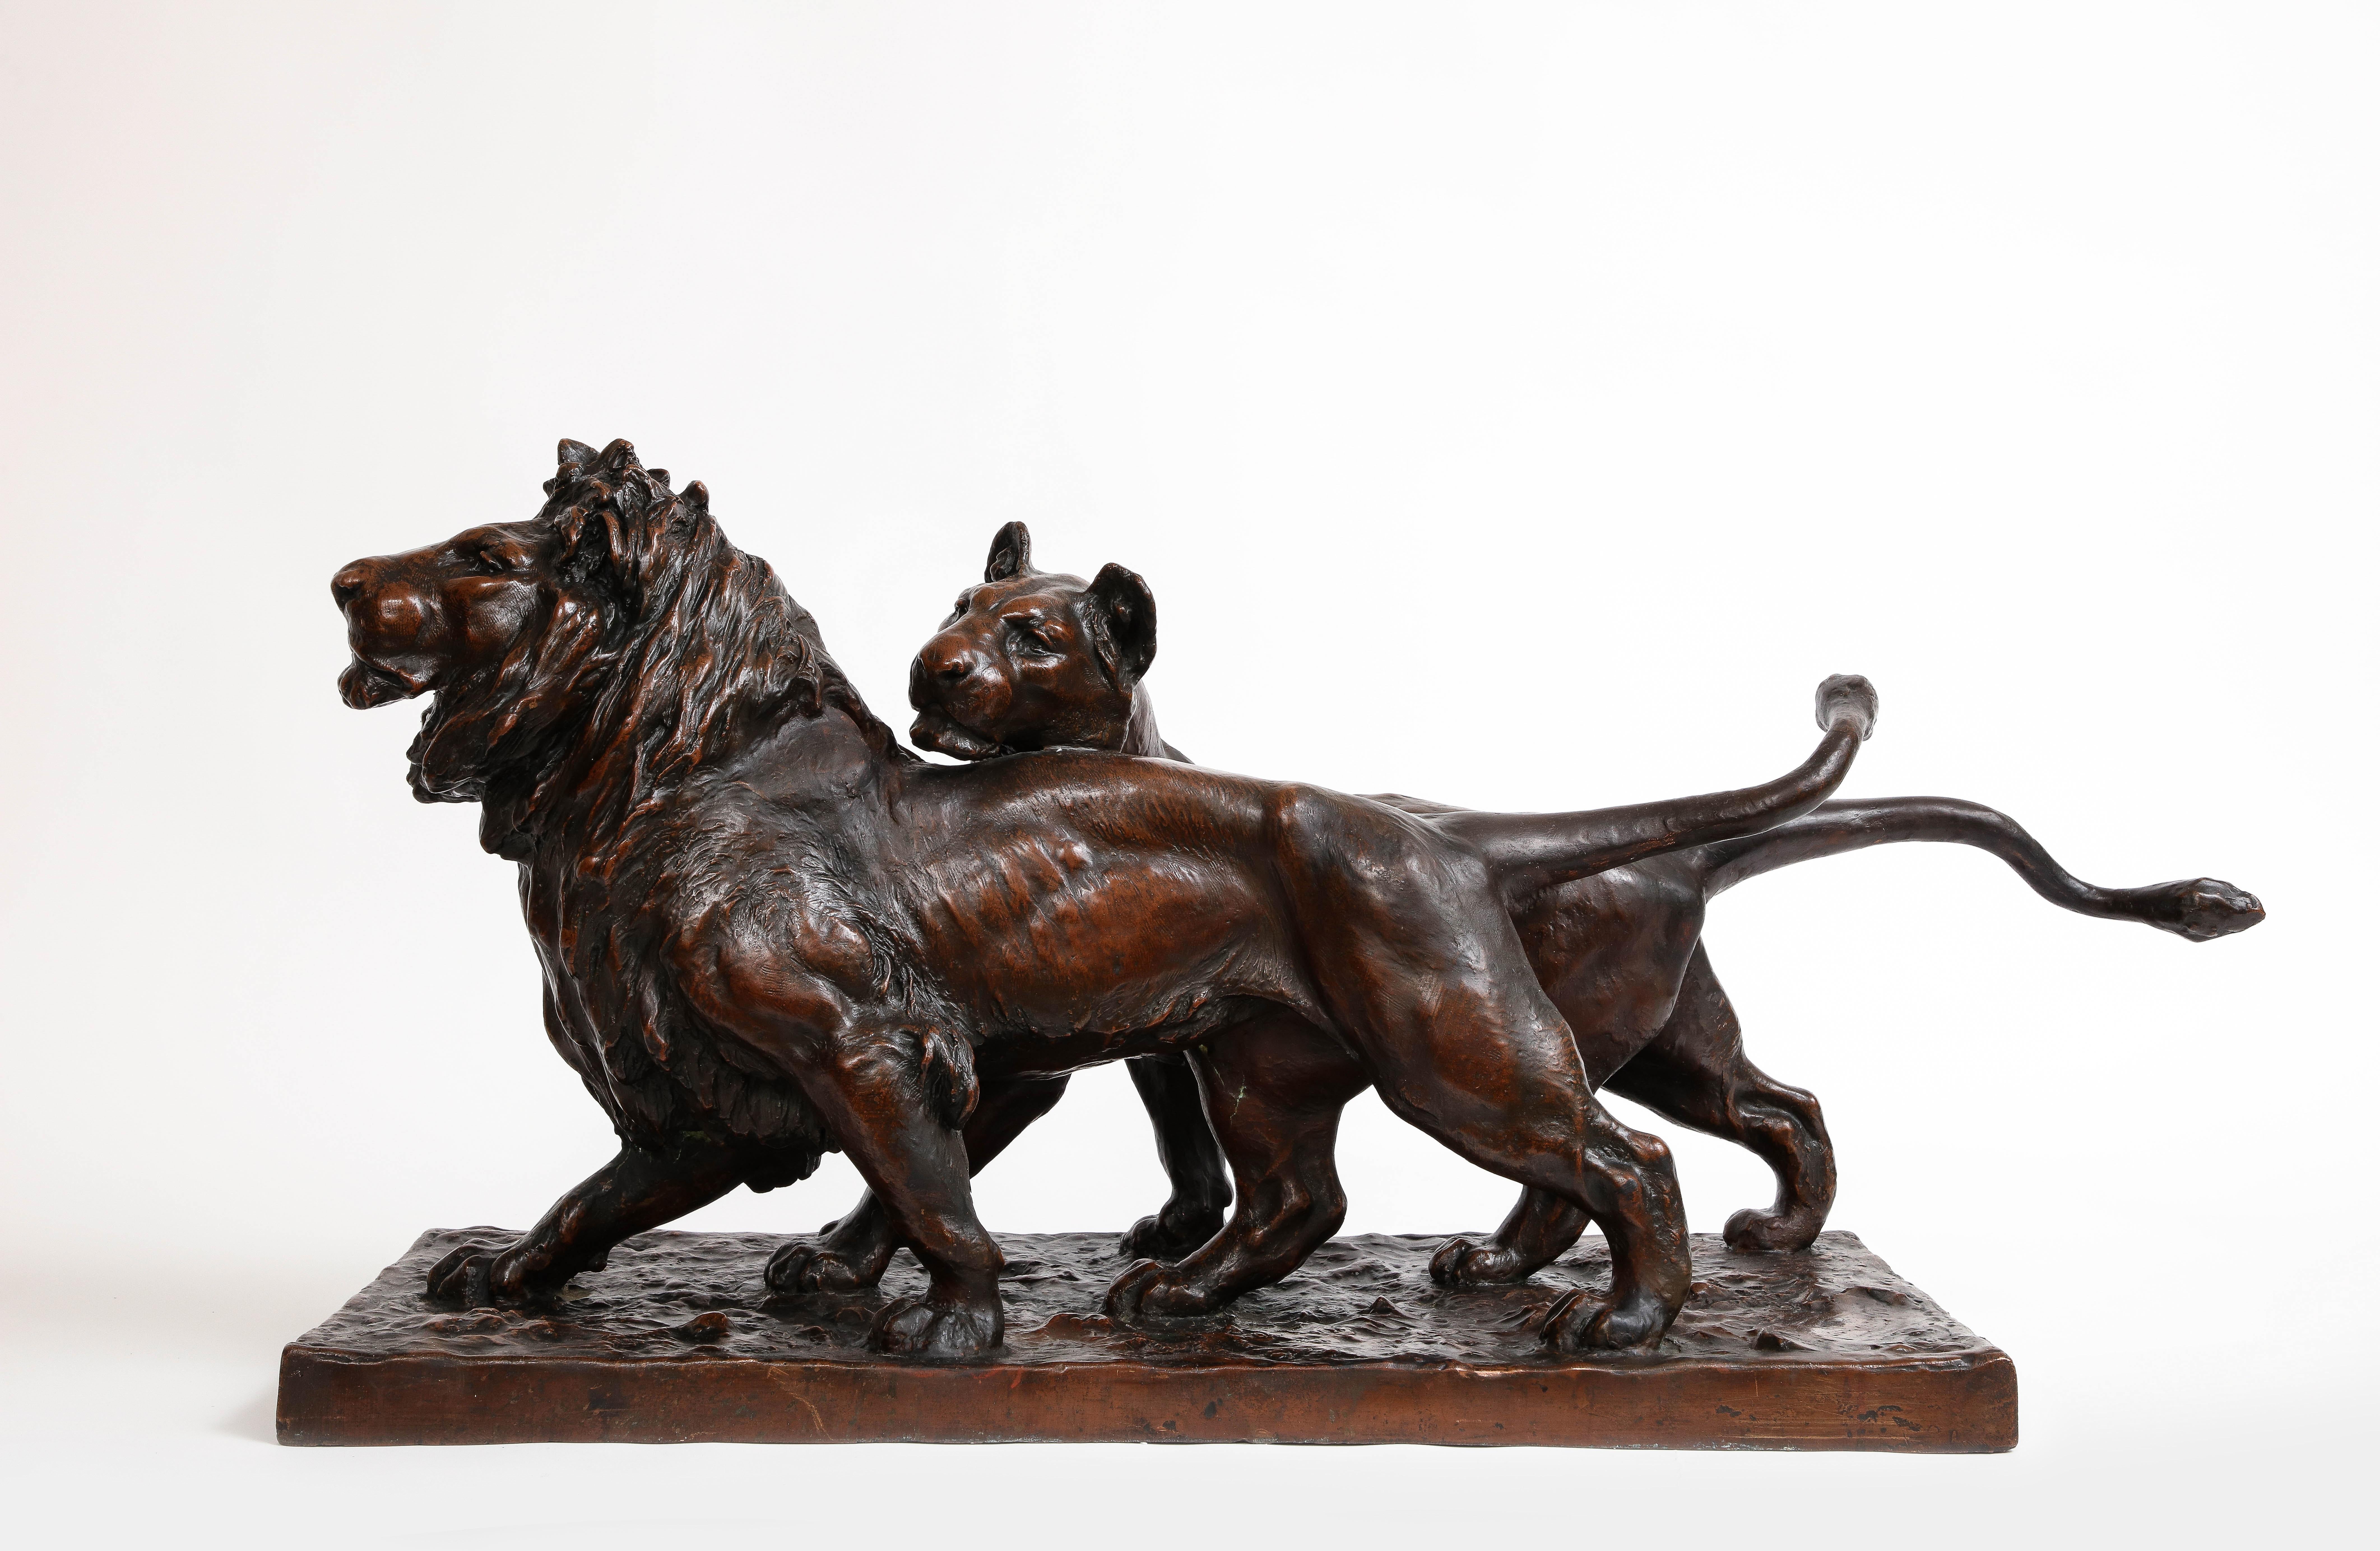 A Patinated Bronze Sculpture of Two Striding Lions, Signed By the Artist

Witness the awe-inspiring spectacle of this extraordinary antique bronze masterpiece, painstakingly hand-carved and adorned with the artist's signature. Prepare to be